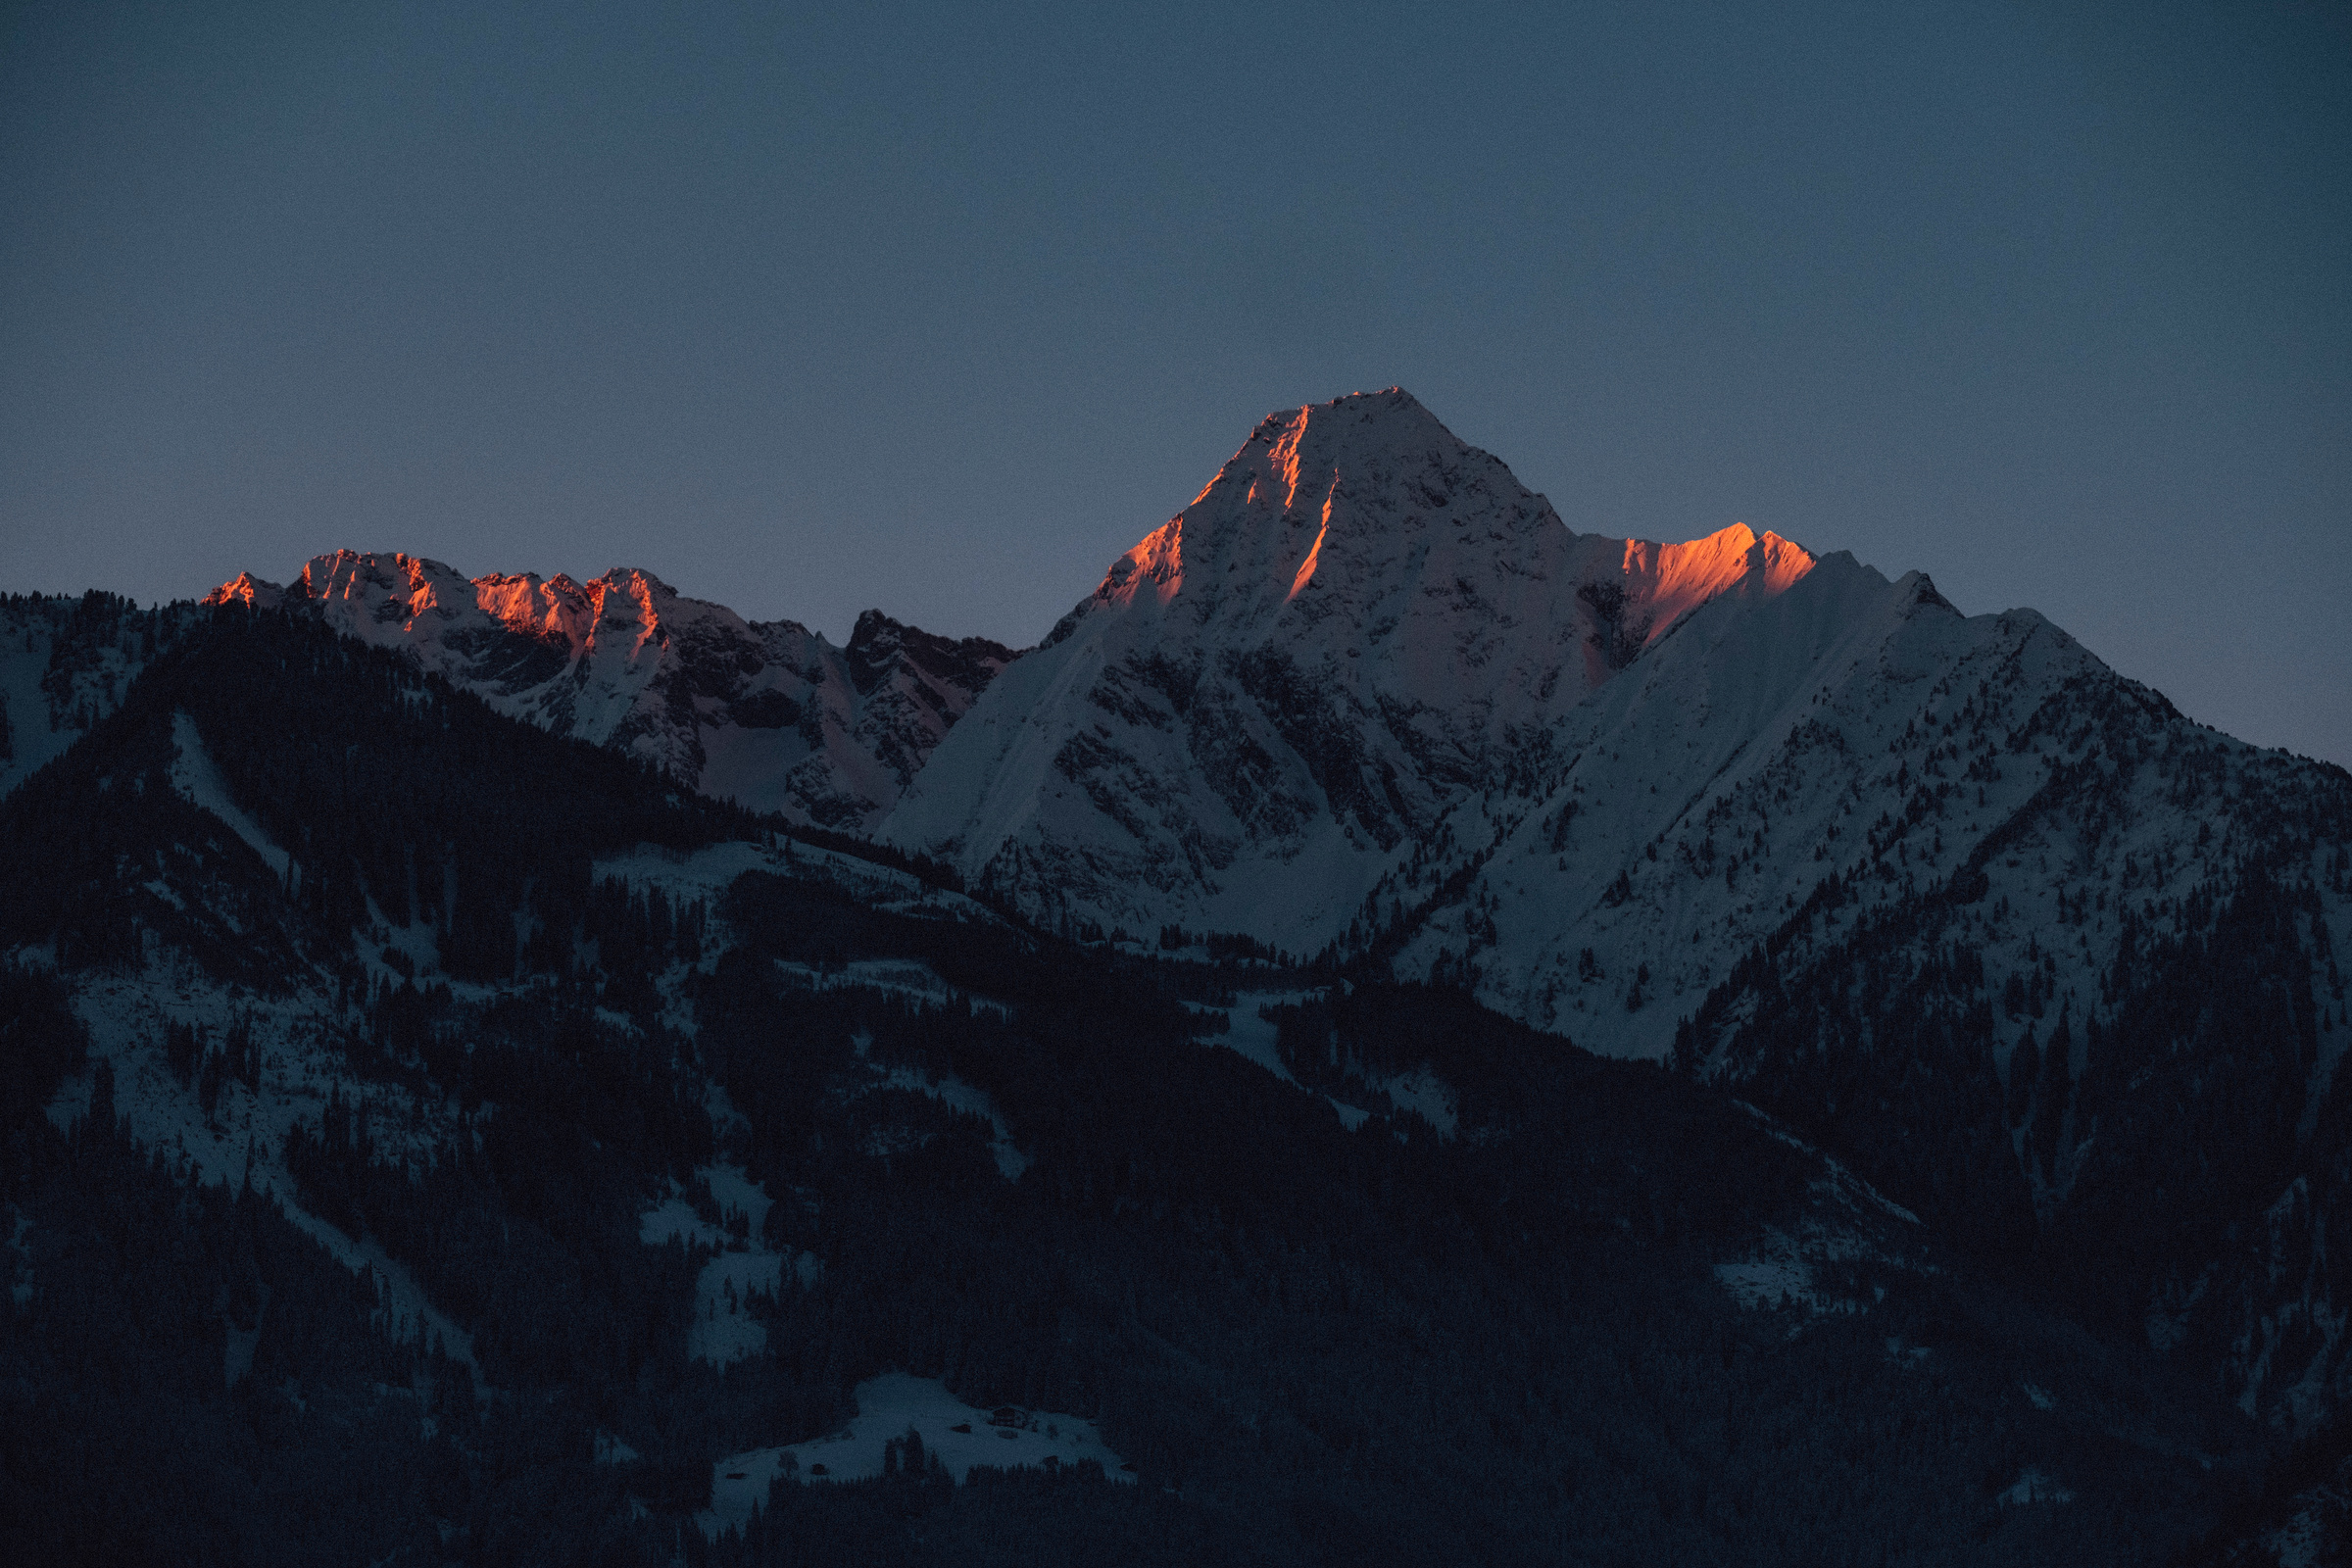 Mountain sunset view during winter